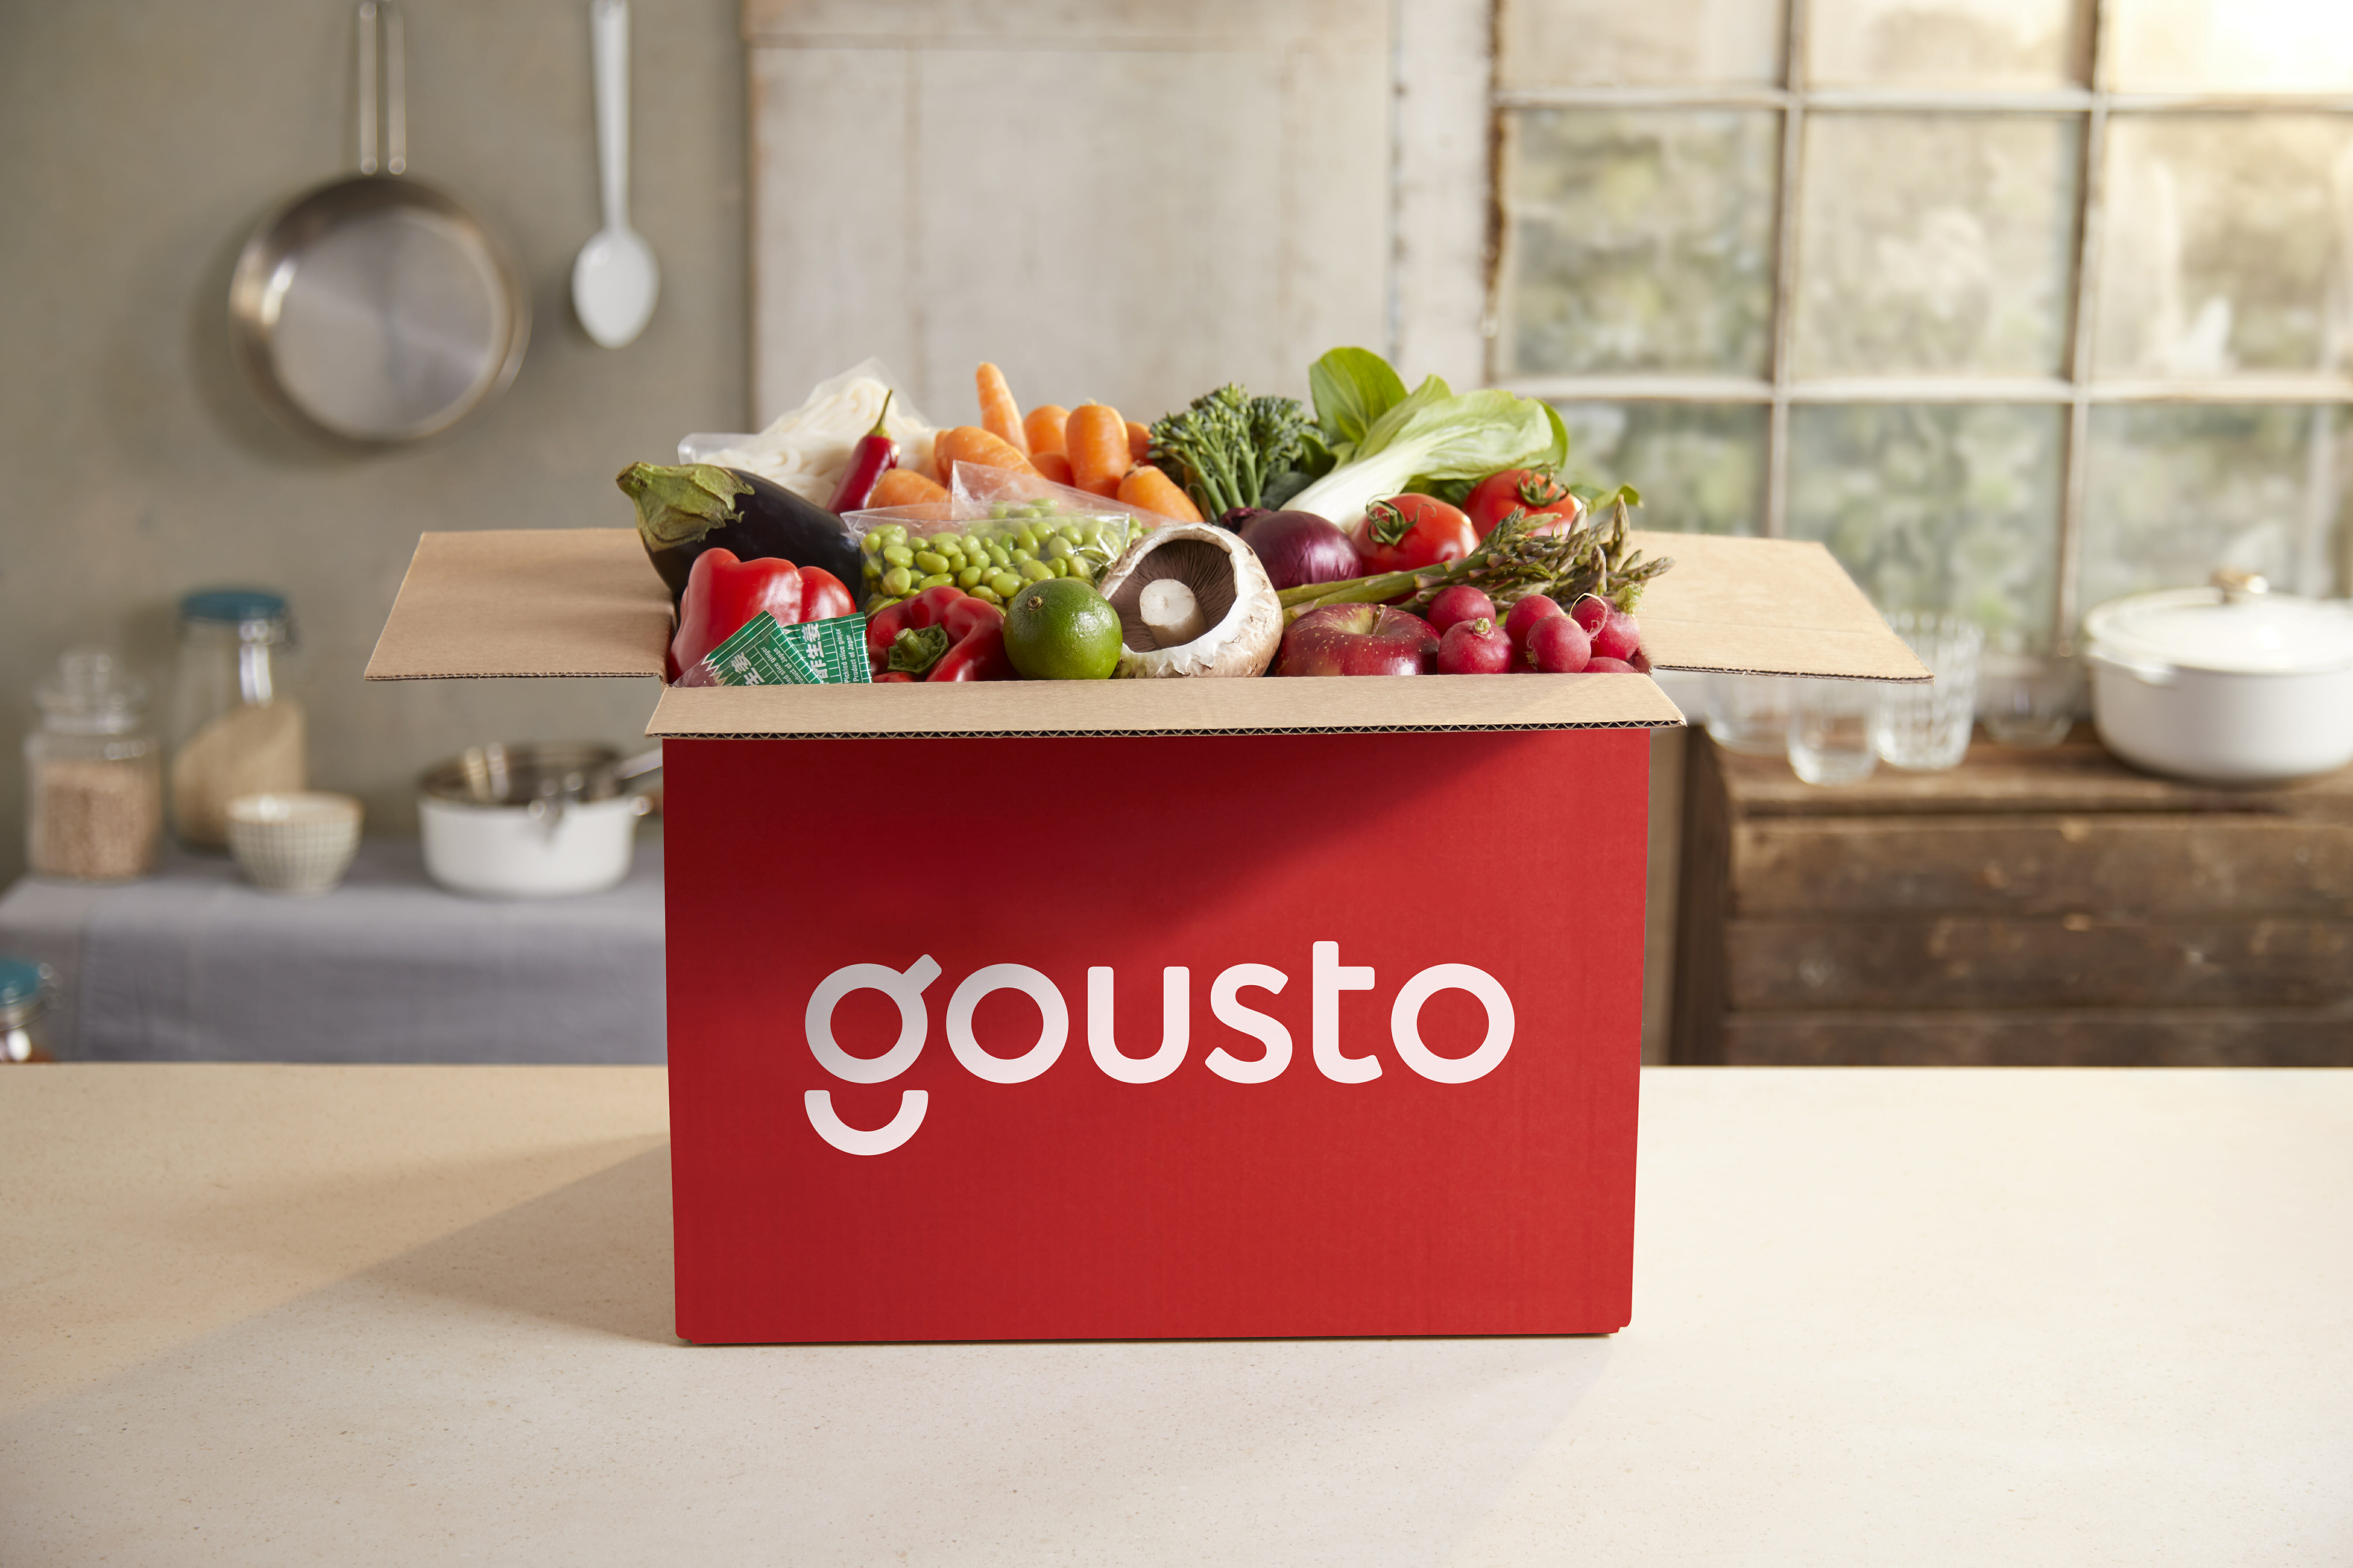 How Gousto unlocks value with discovery teams